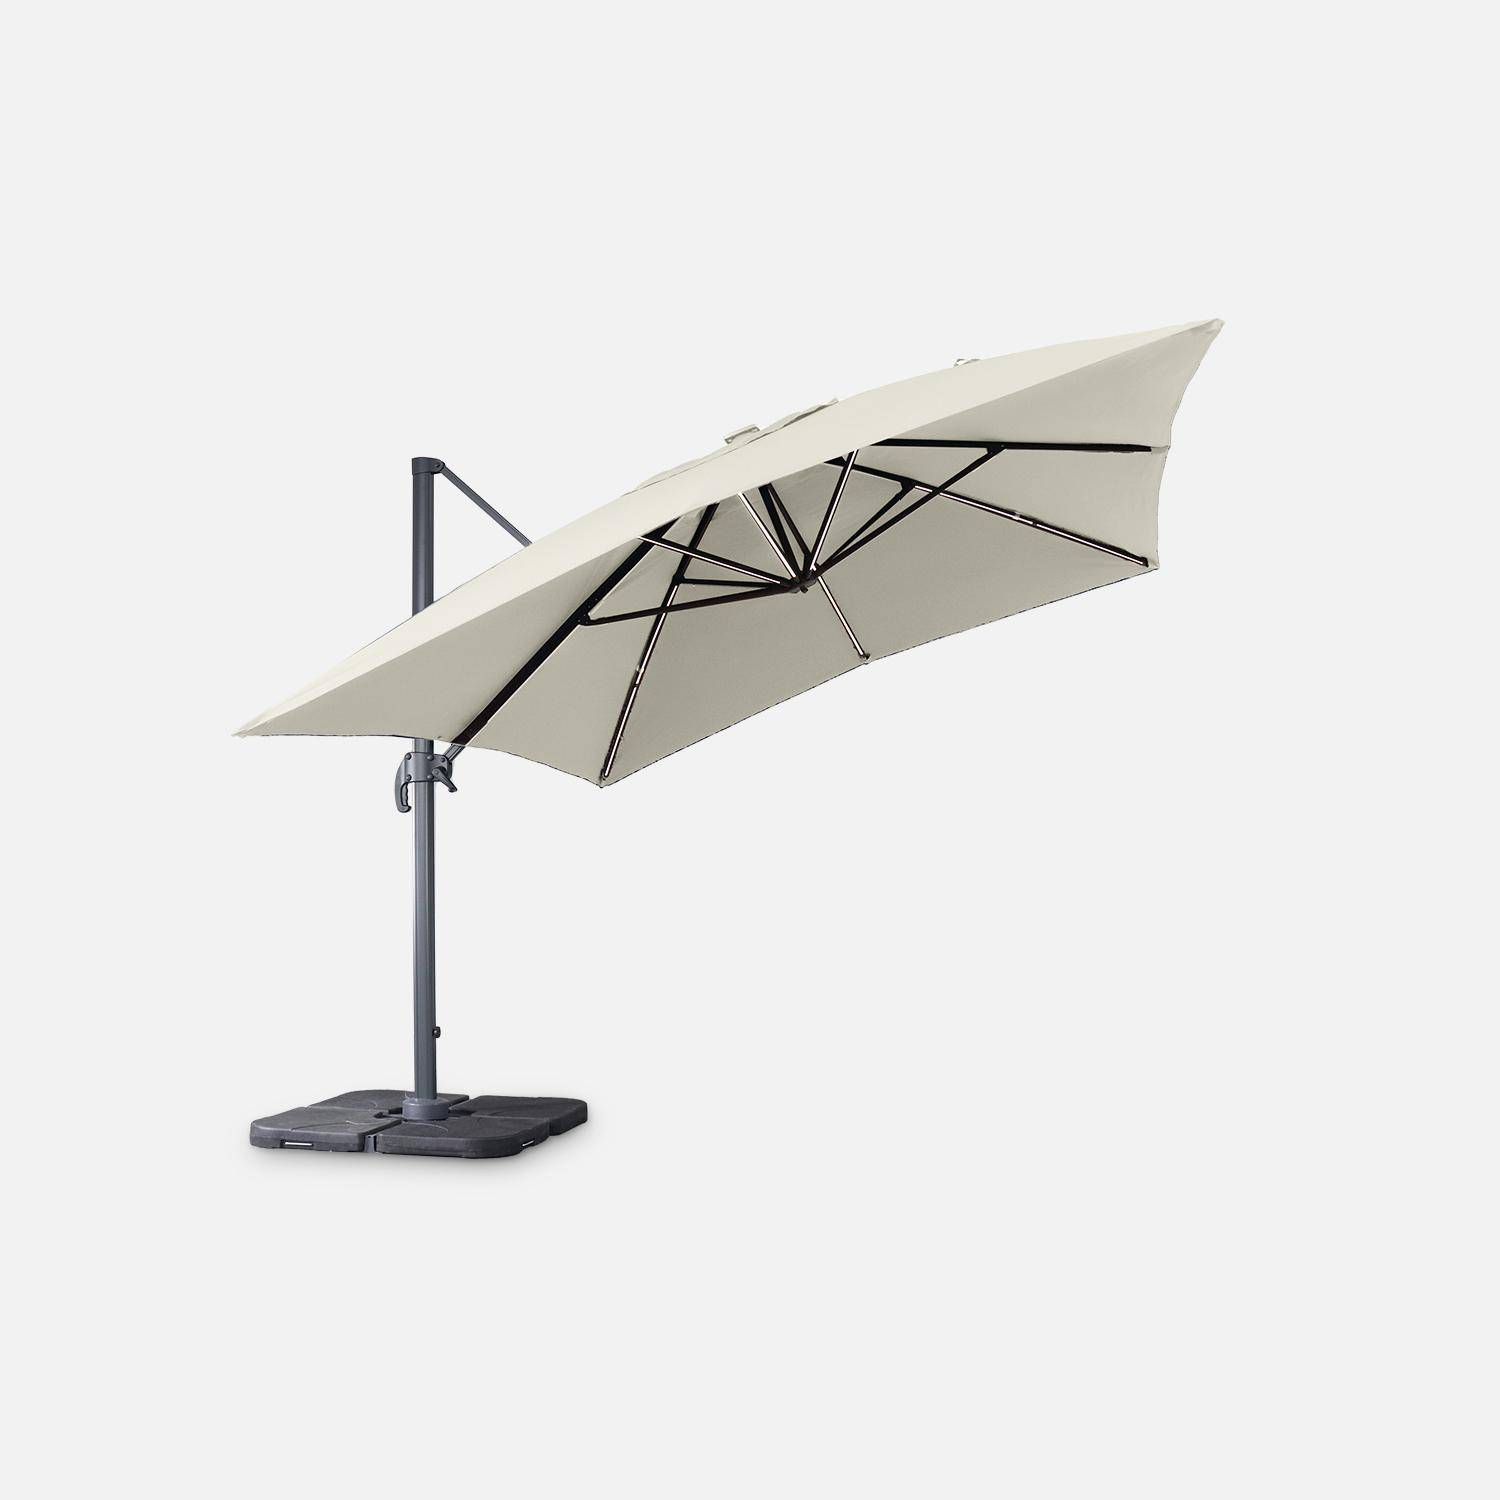 Premium quality rectangular 3x4m cantilever parasol with solar-powered integrated LED lights - Cantilever parasol, tiltable, foldable with 360° rotation, solar charging, cover included - Luce - Beige Photo3